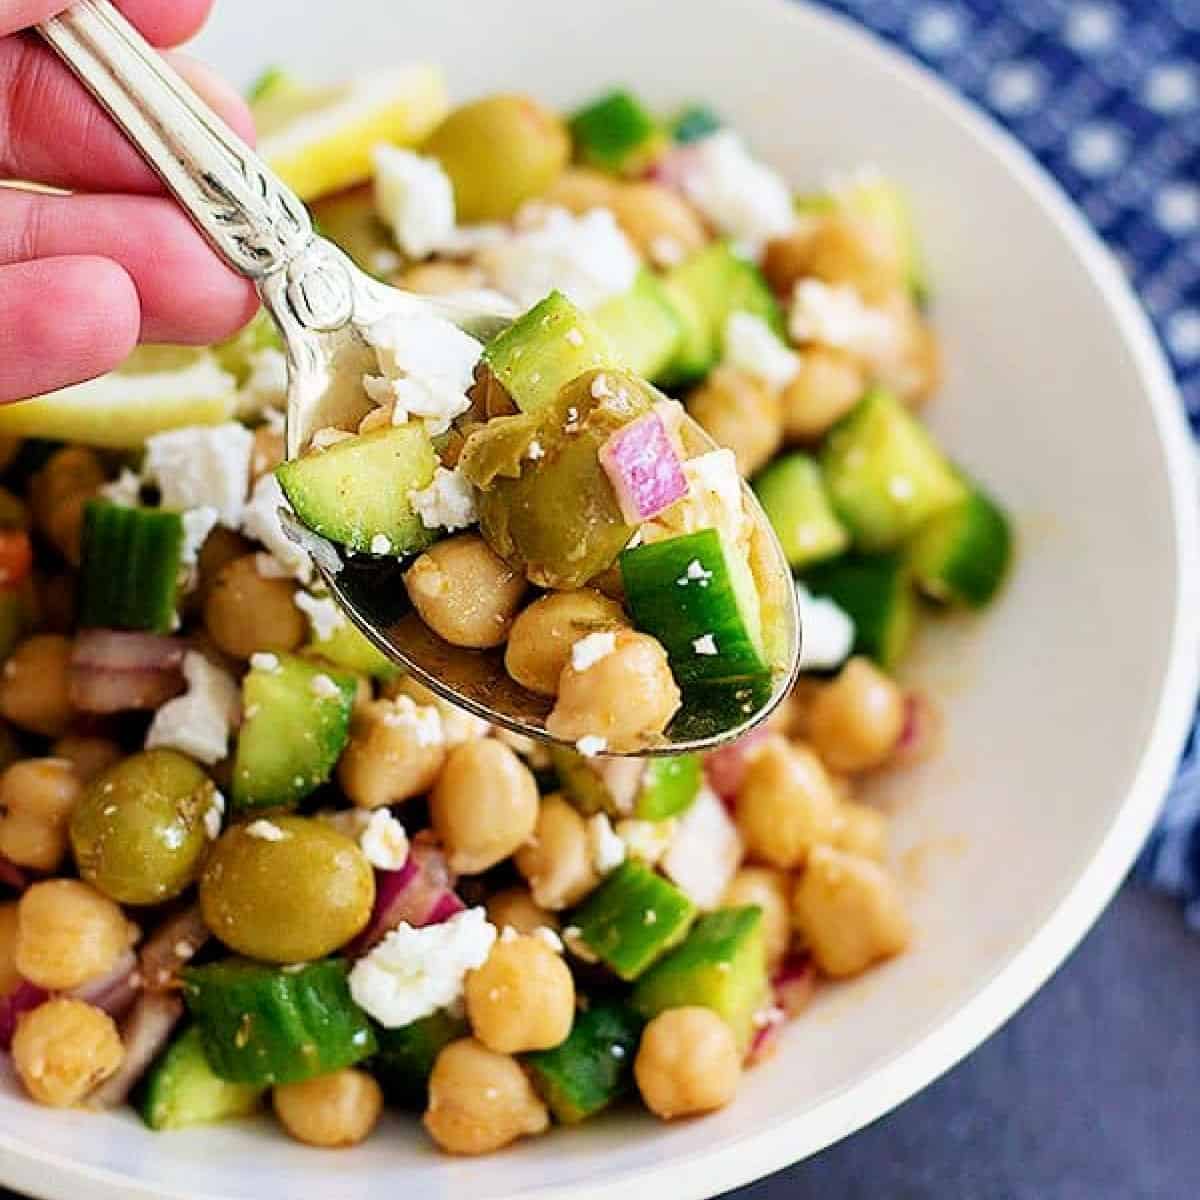 Ready in 10 minutes, this Greek chickpea salad is the perfect lunch or dinner for weekdays. You only need a few ingredients to make this hearty and healthy salad.
